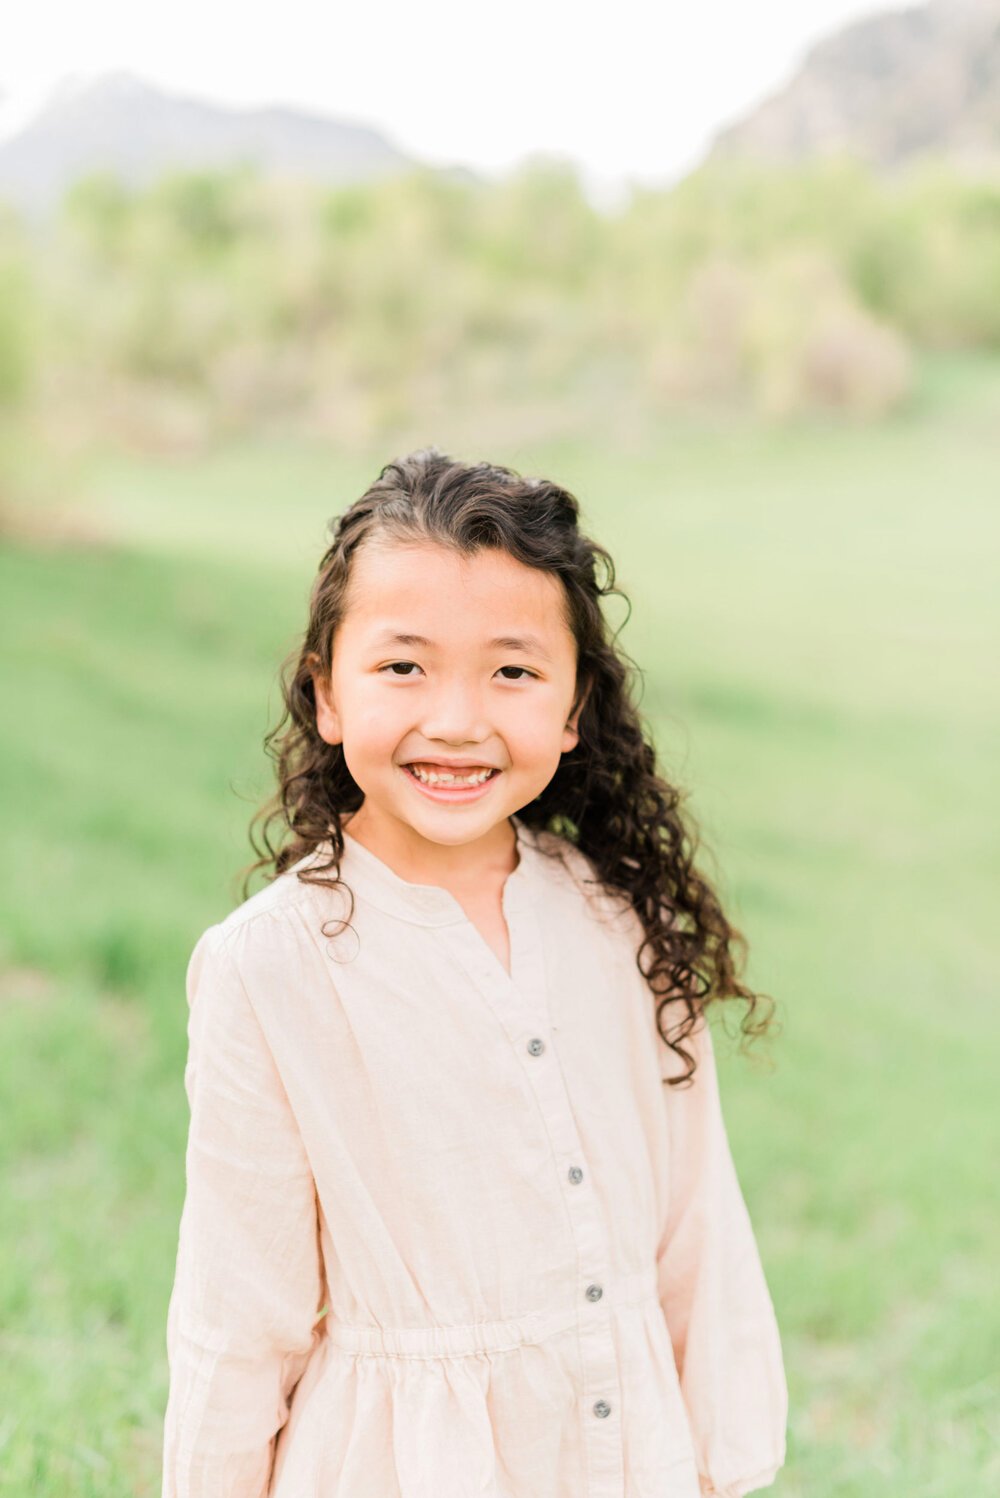  A girl with curly brown hair smiles during a photoshoot by Atlanta-based photographer, Jacquie Erickson.&nbsp; Personalized kid's portraits capture their childhood little girl portraits Fayetteville Peachtree City&nbsp; #childportraits #childrenphot